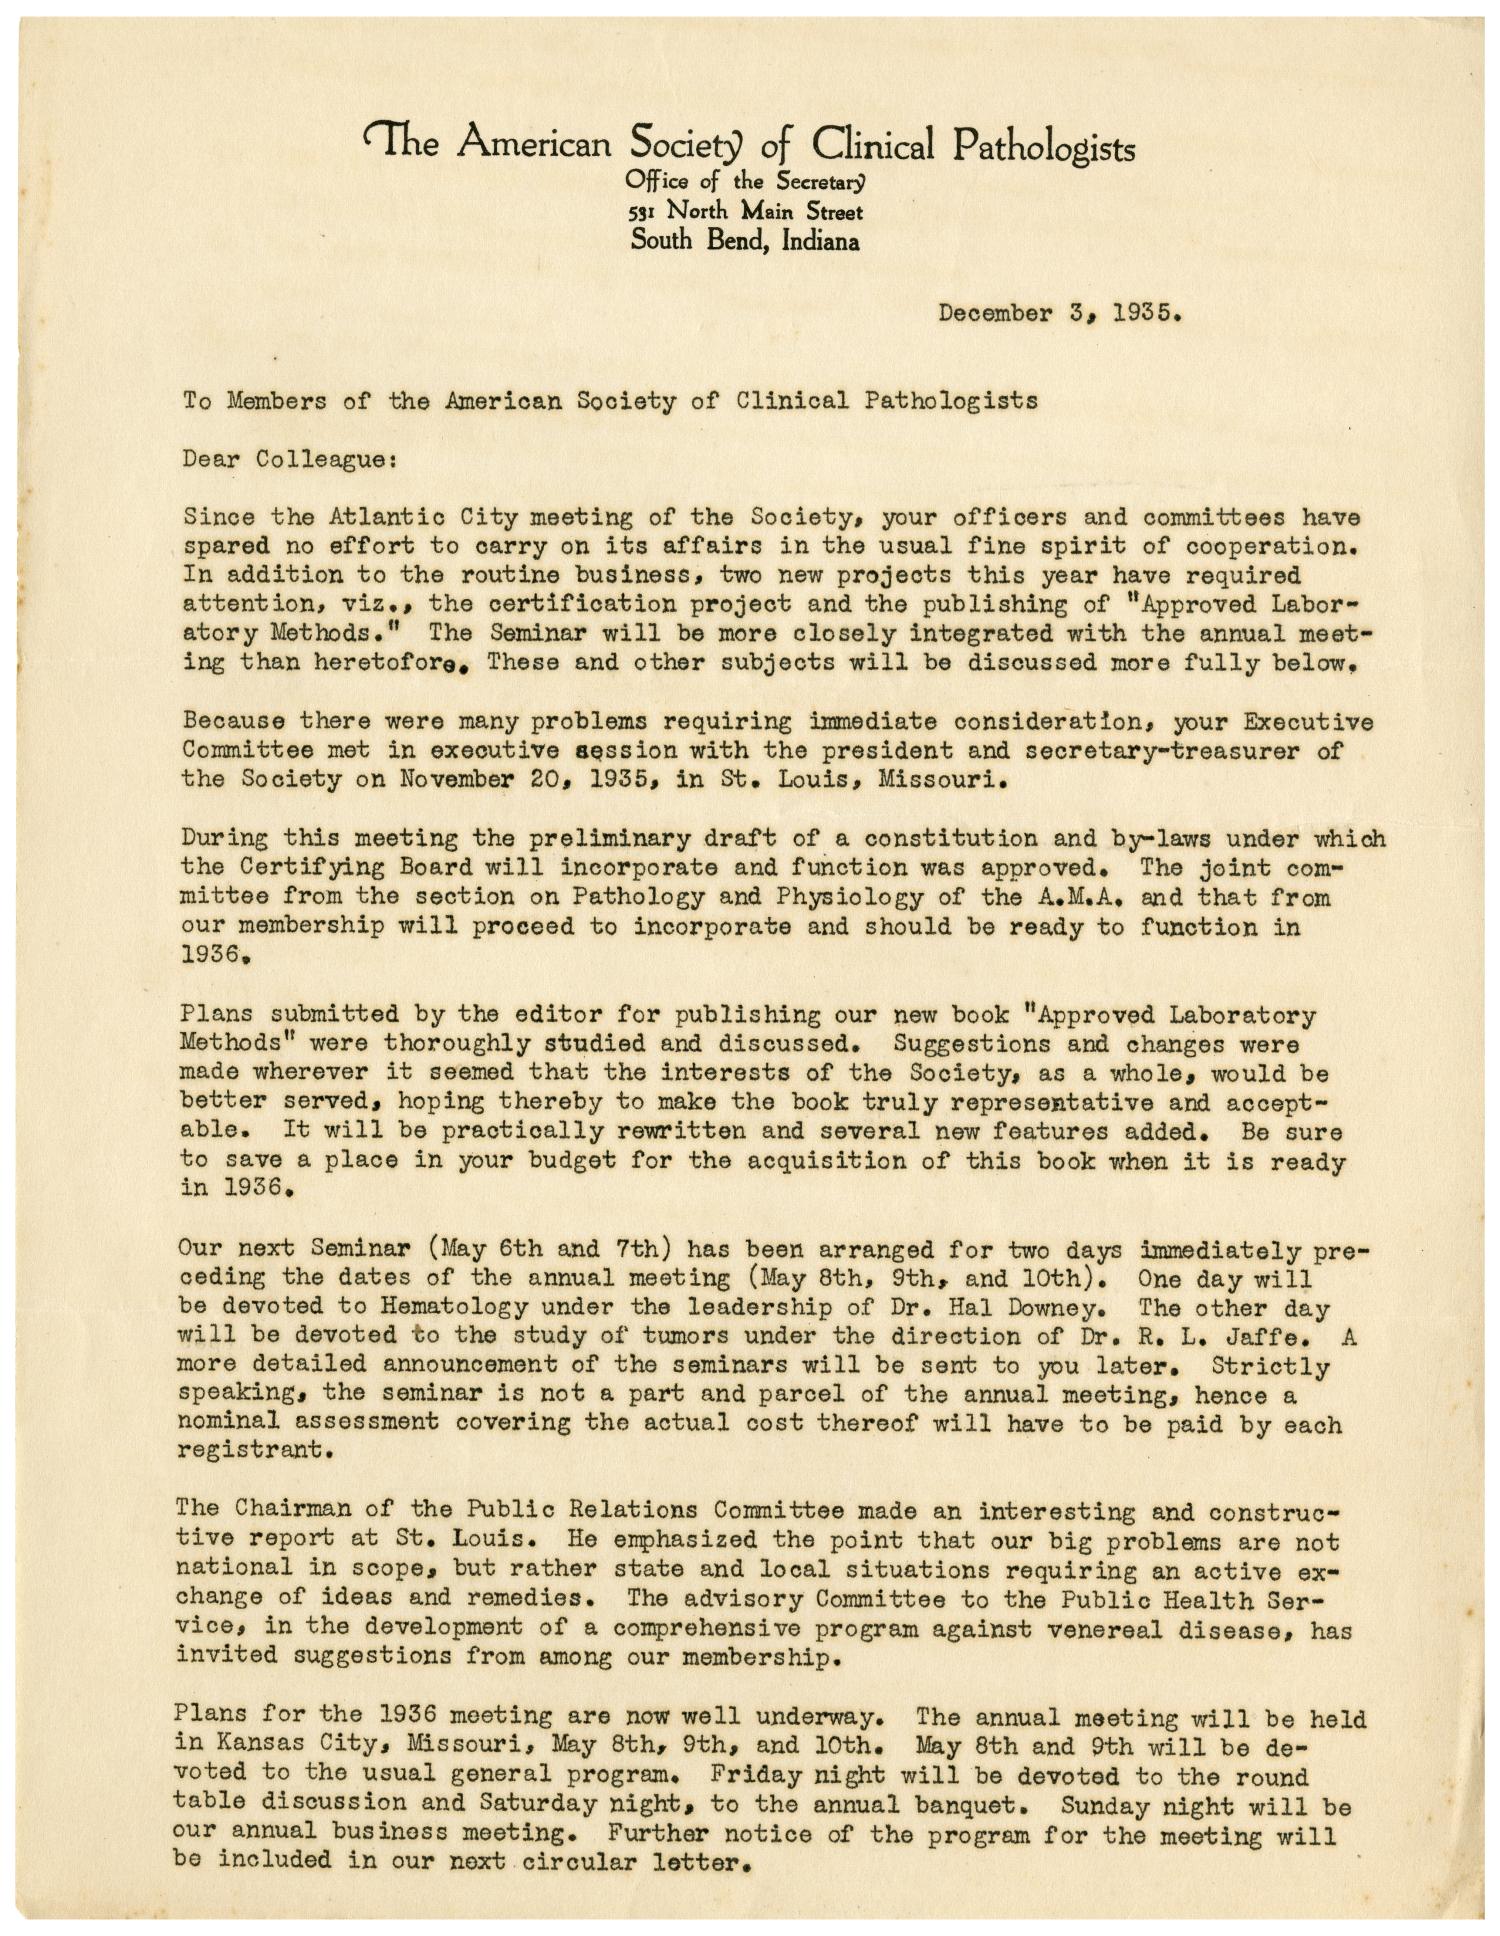 [Letter from The American Society of Clinical Pathologists - December 3, 1935]
                                                
                                                    [Sequence #]: 1 of 2
                                                